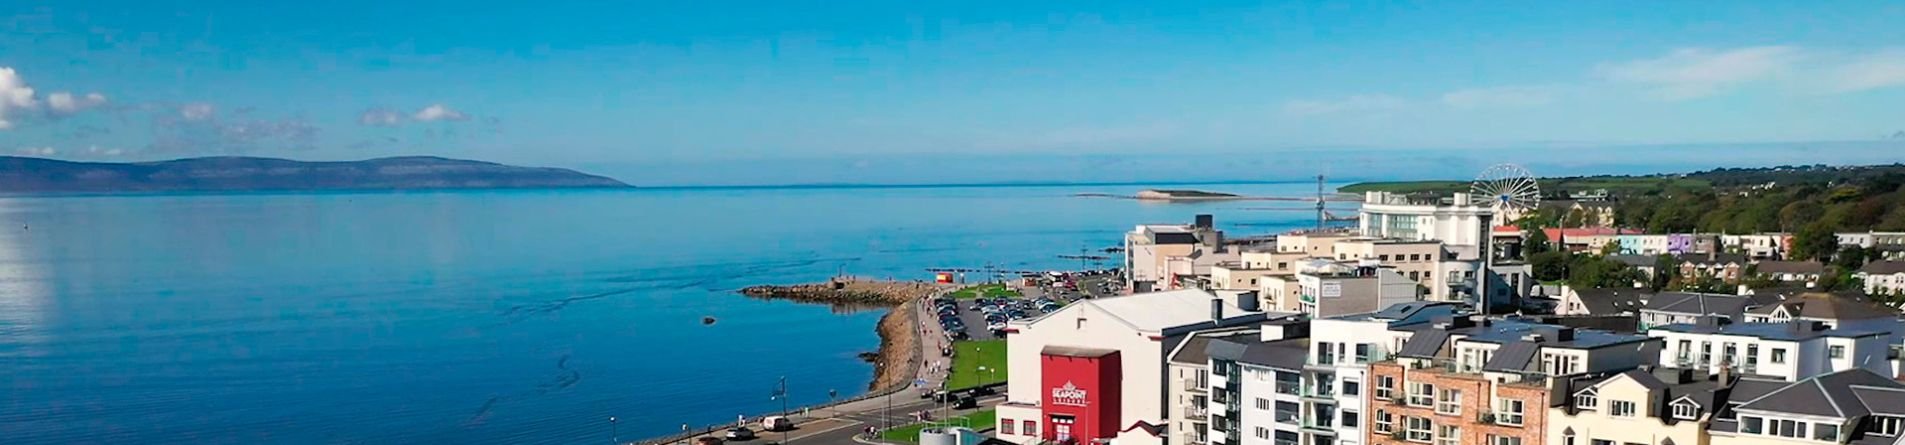 An aerial view of salthill in galway